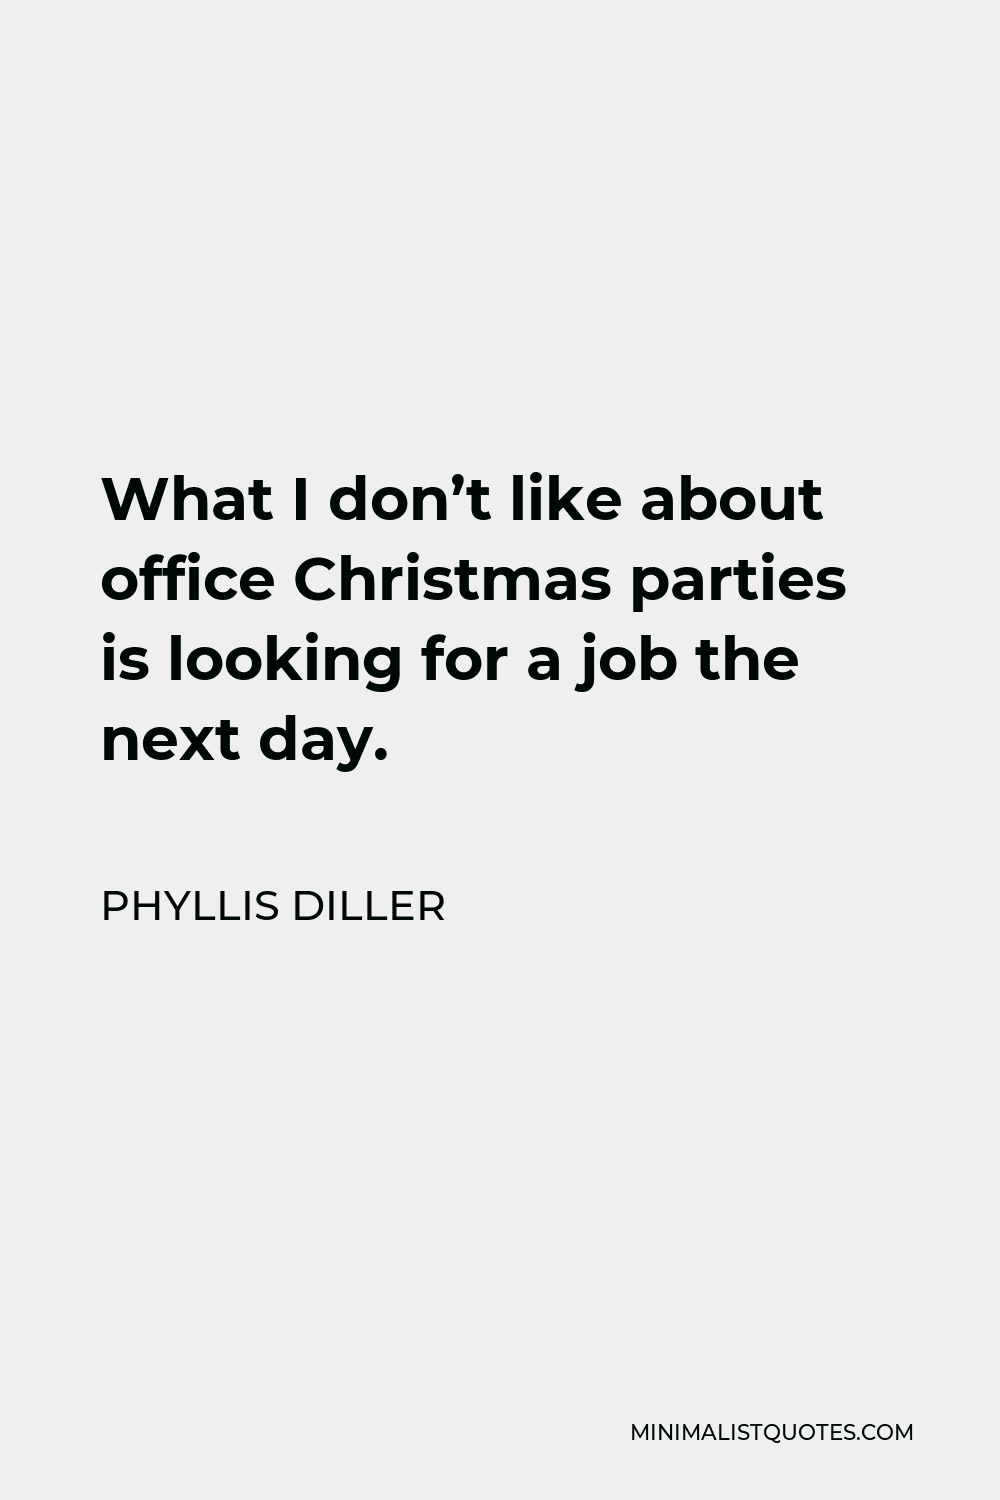 Phyllis Diller Quote - What I don’t like about office Christmas parties is looking for a job the next day.